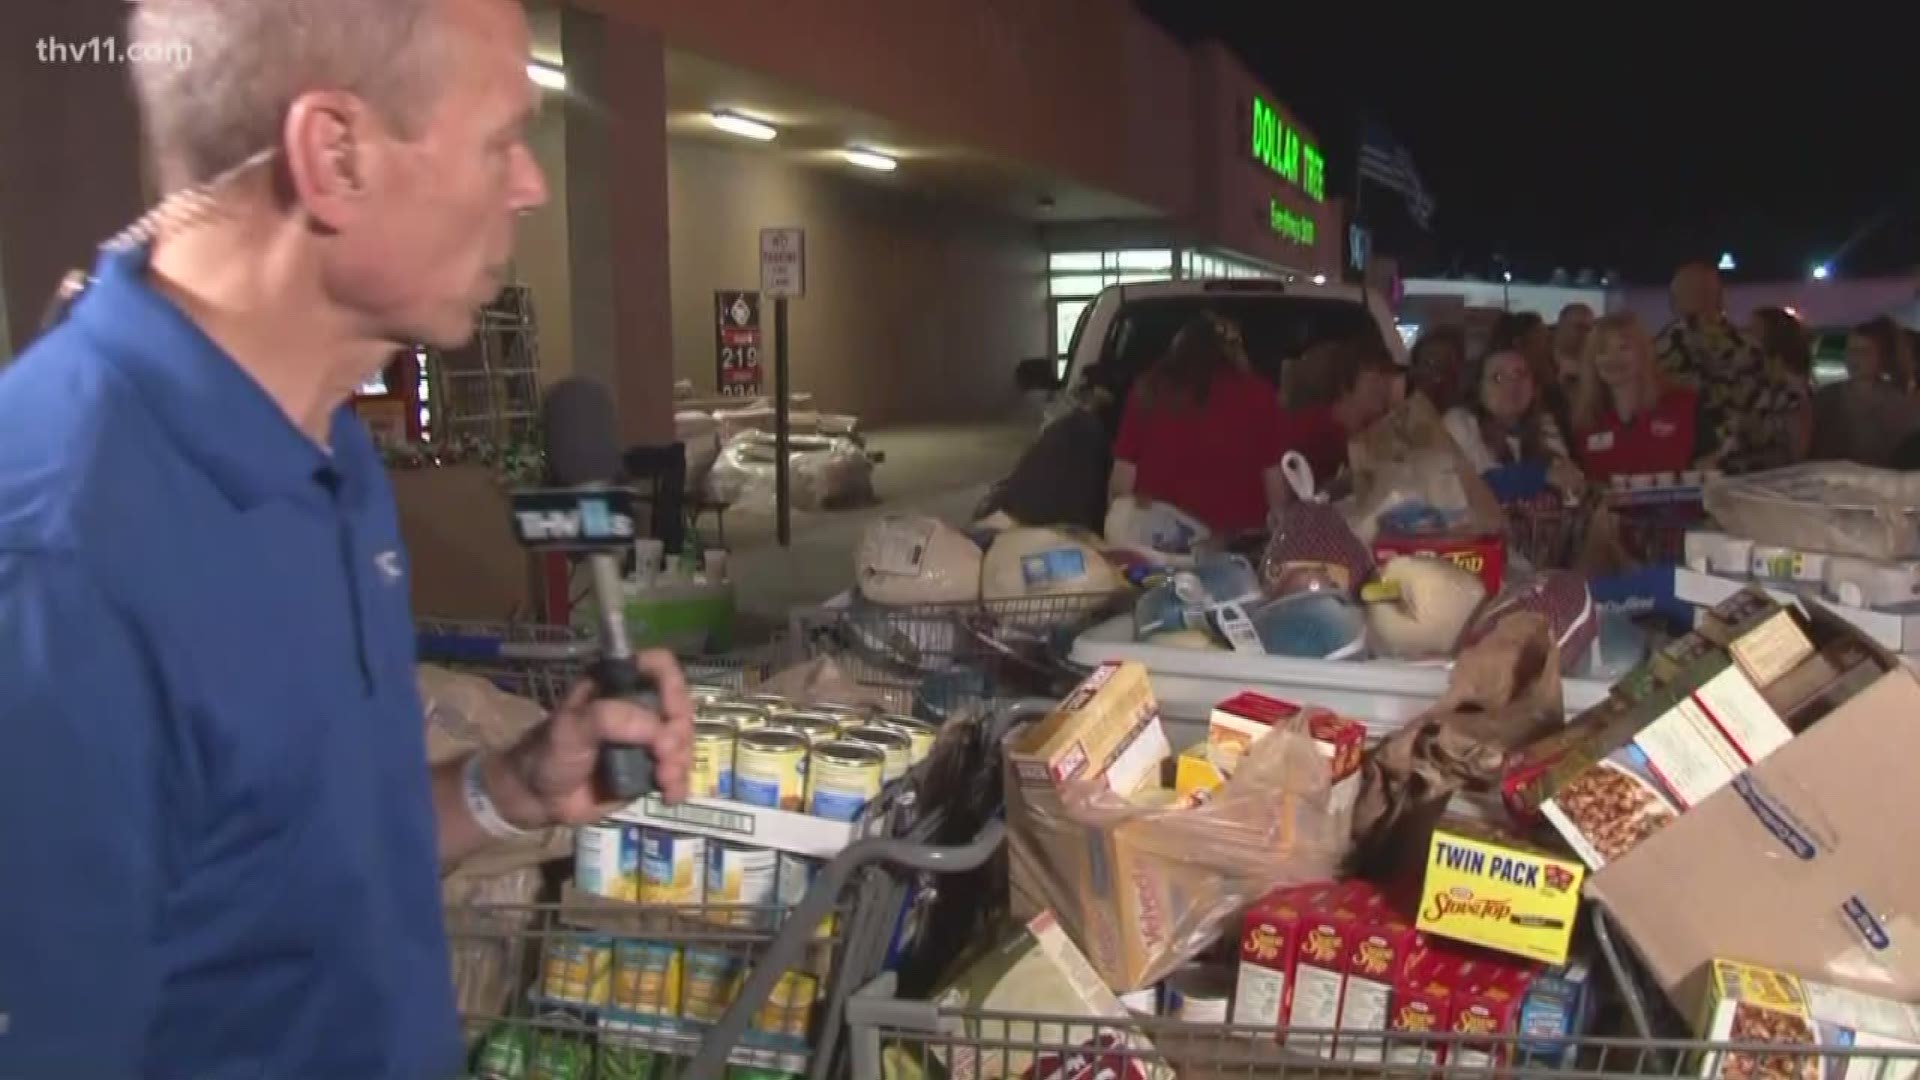 THV11's Craig O'Neill was live at the Kroger in Jacksonville collecting donations to feed Arkansas veterans this Thanksgiving.